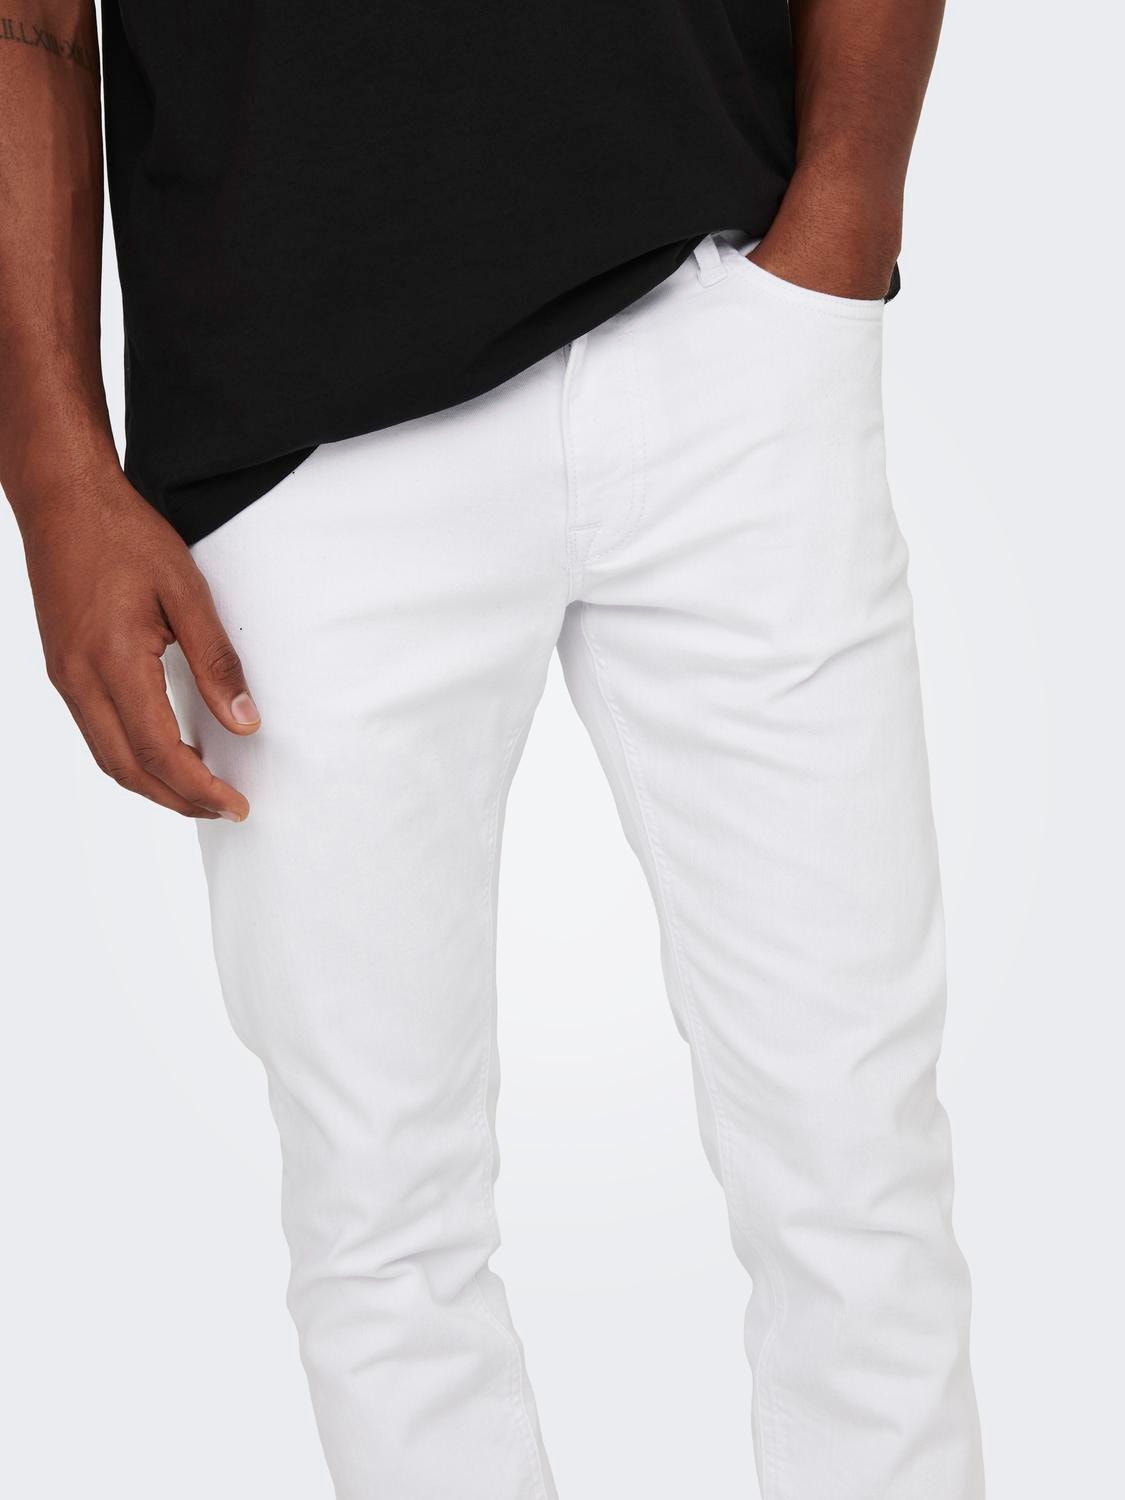 ONLY & SONS Slim Fit Low rise Jeans -White Denim - 22026529